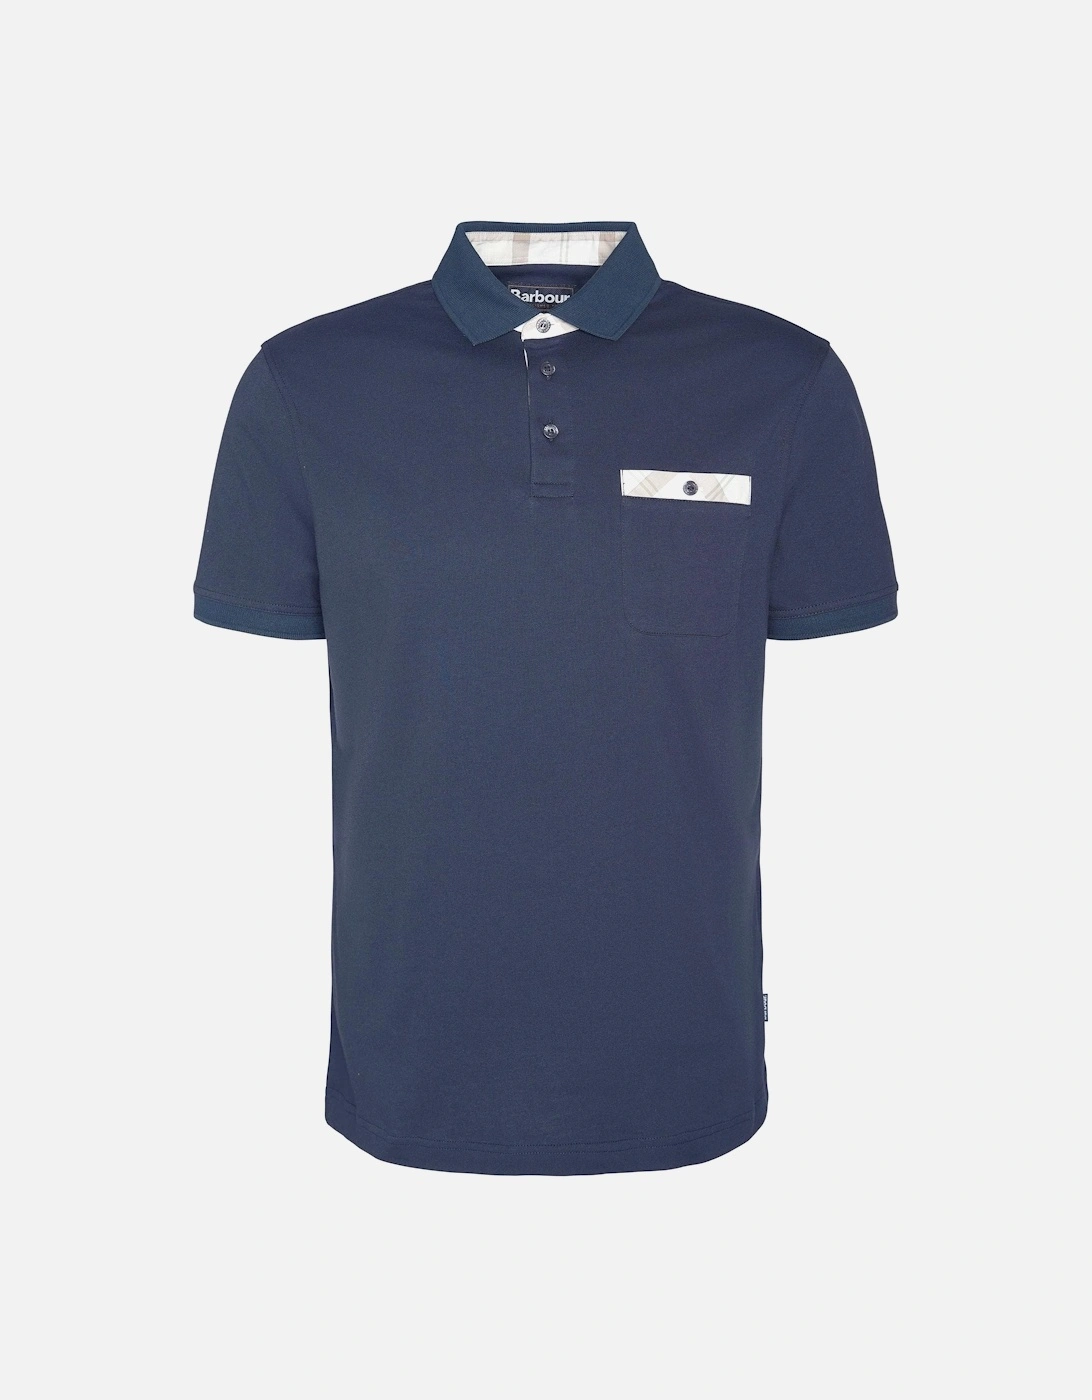 Hirstly Mens Tailored Polo Shirt